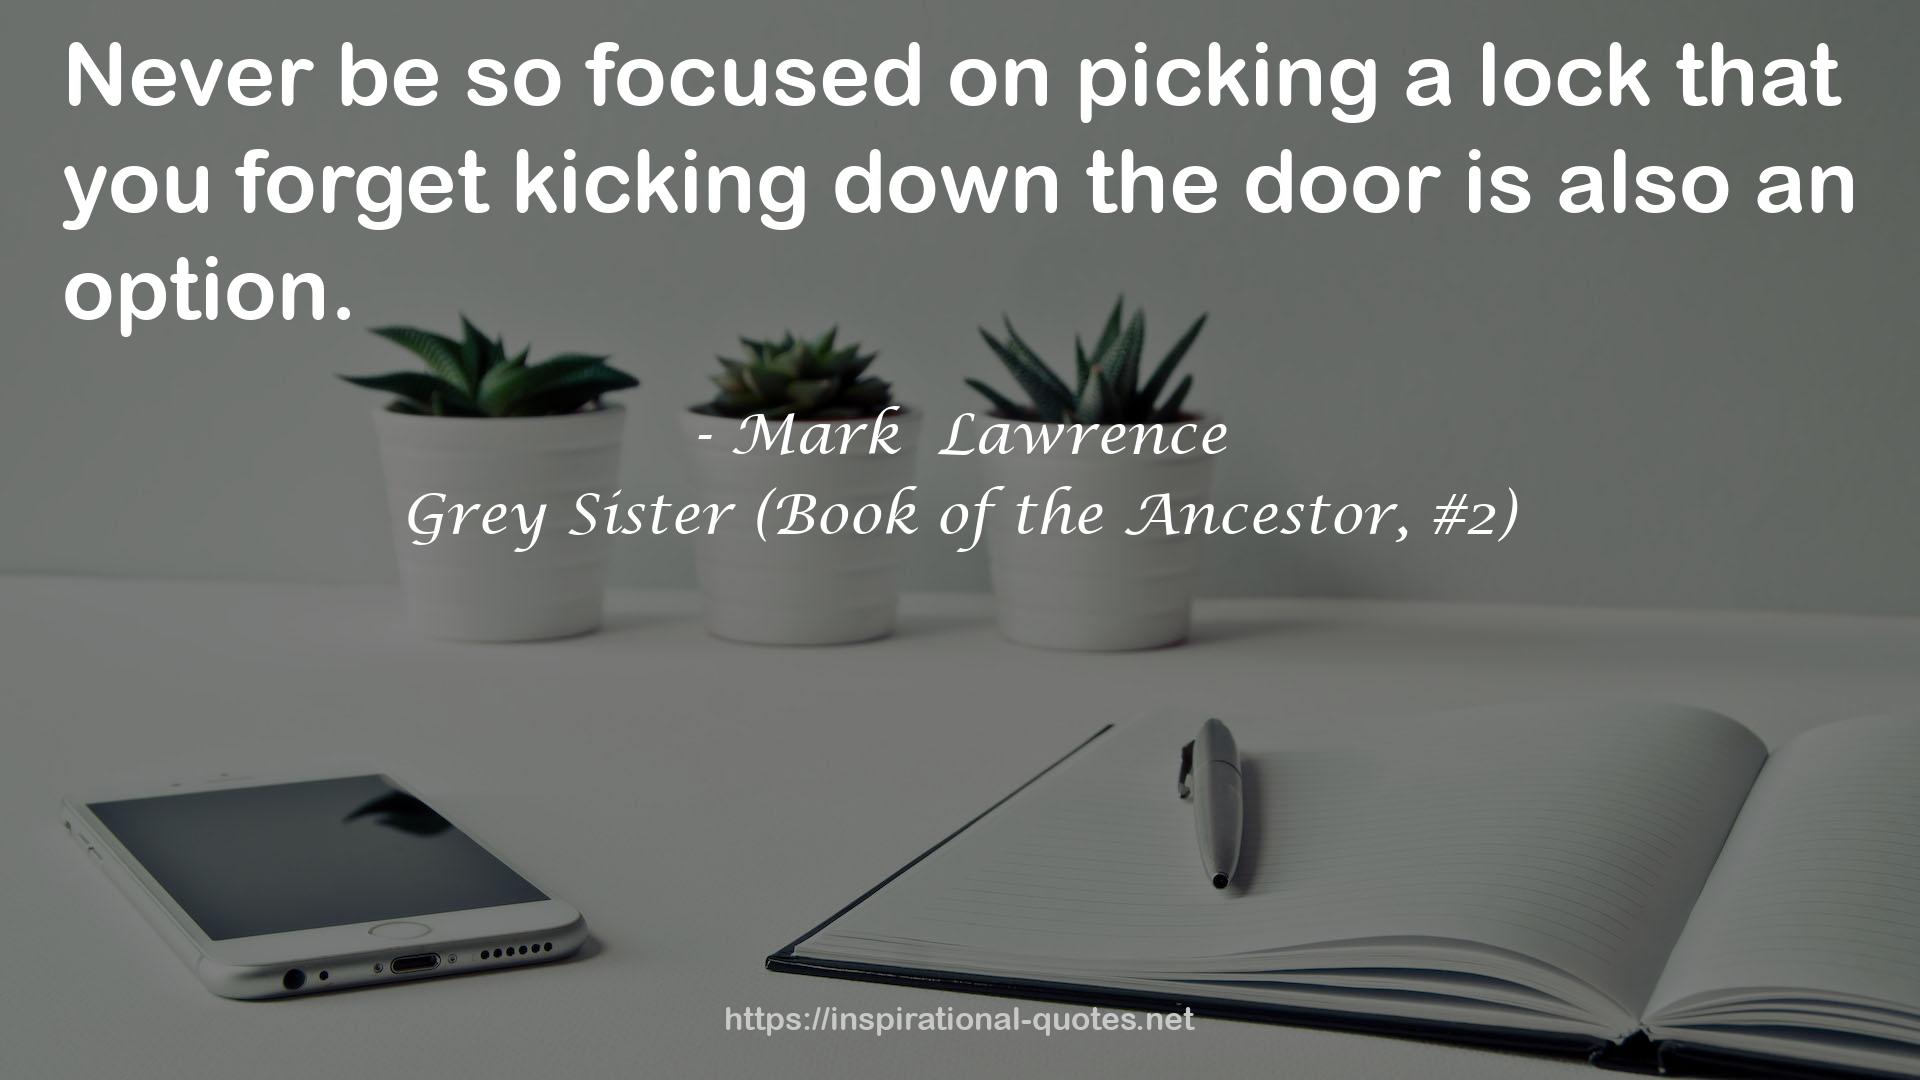 Grey Sister (Book of the Ancestor, #2) QUOTES